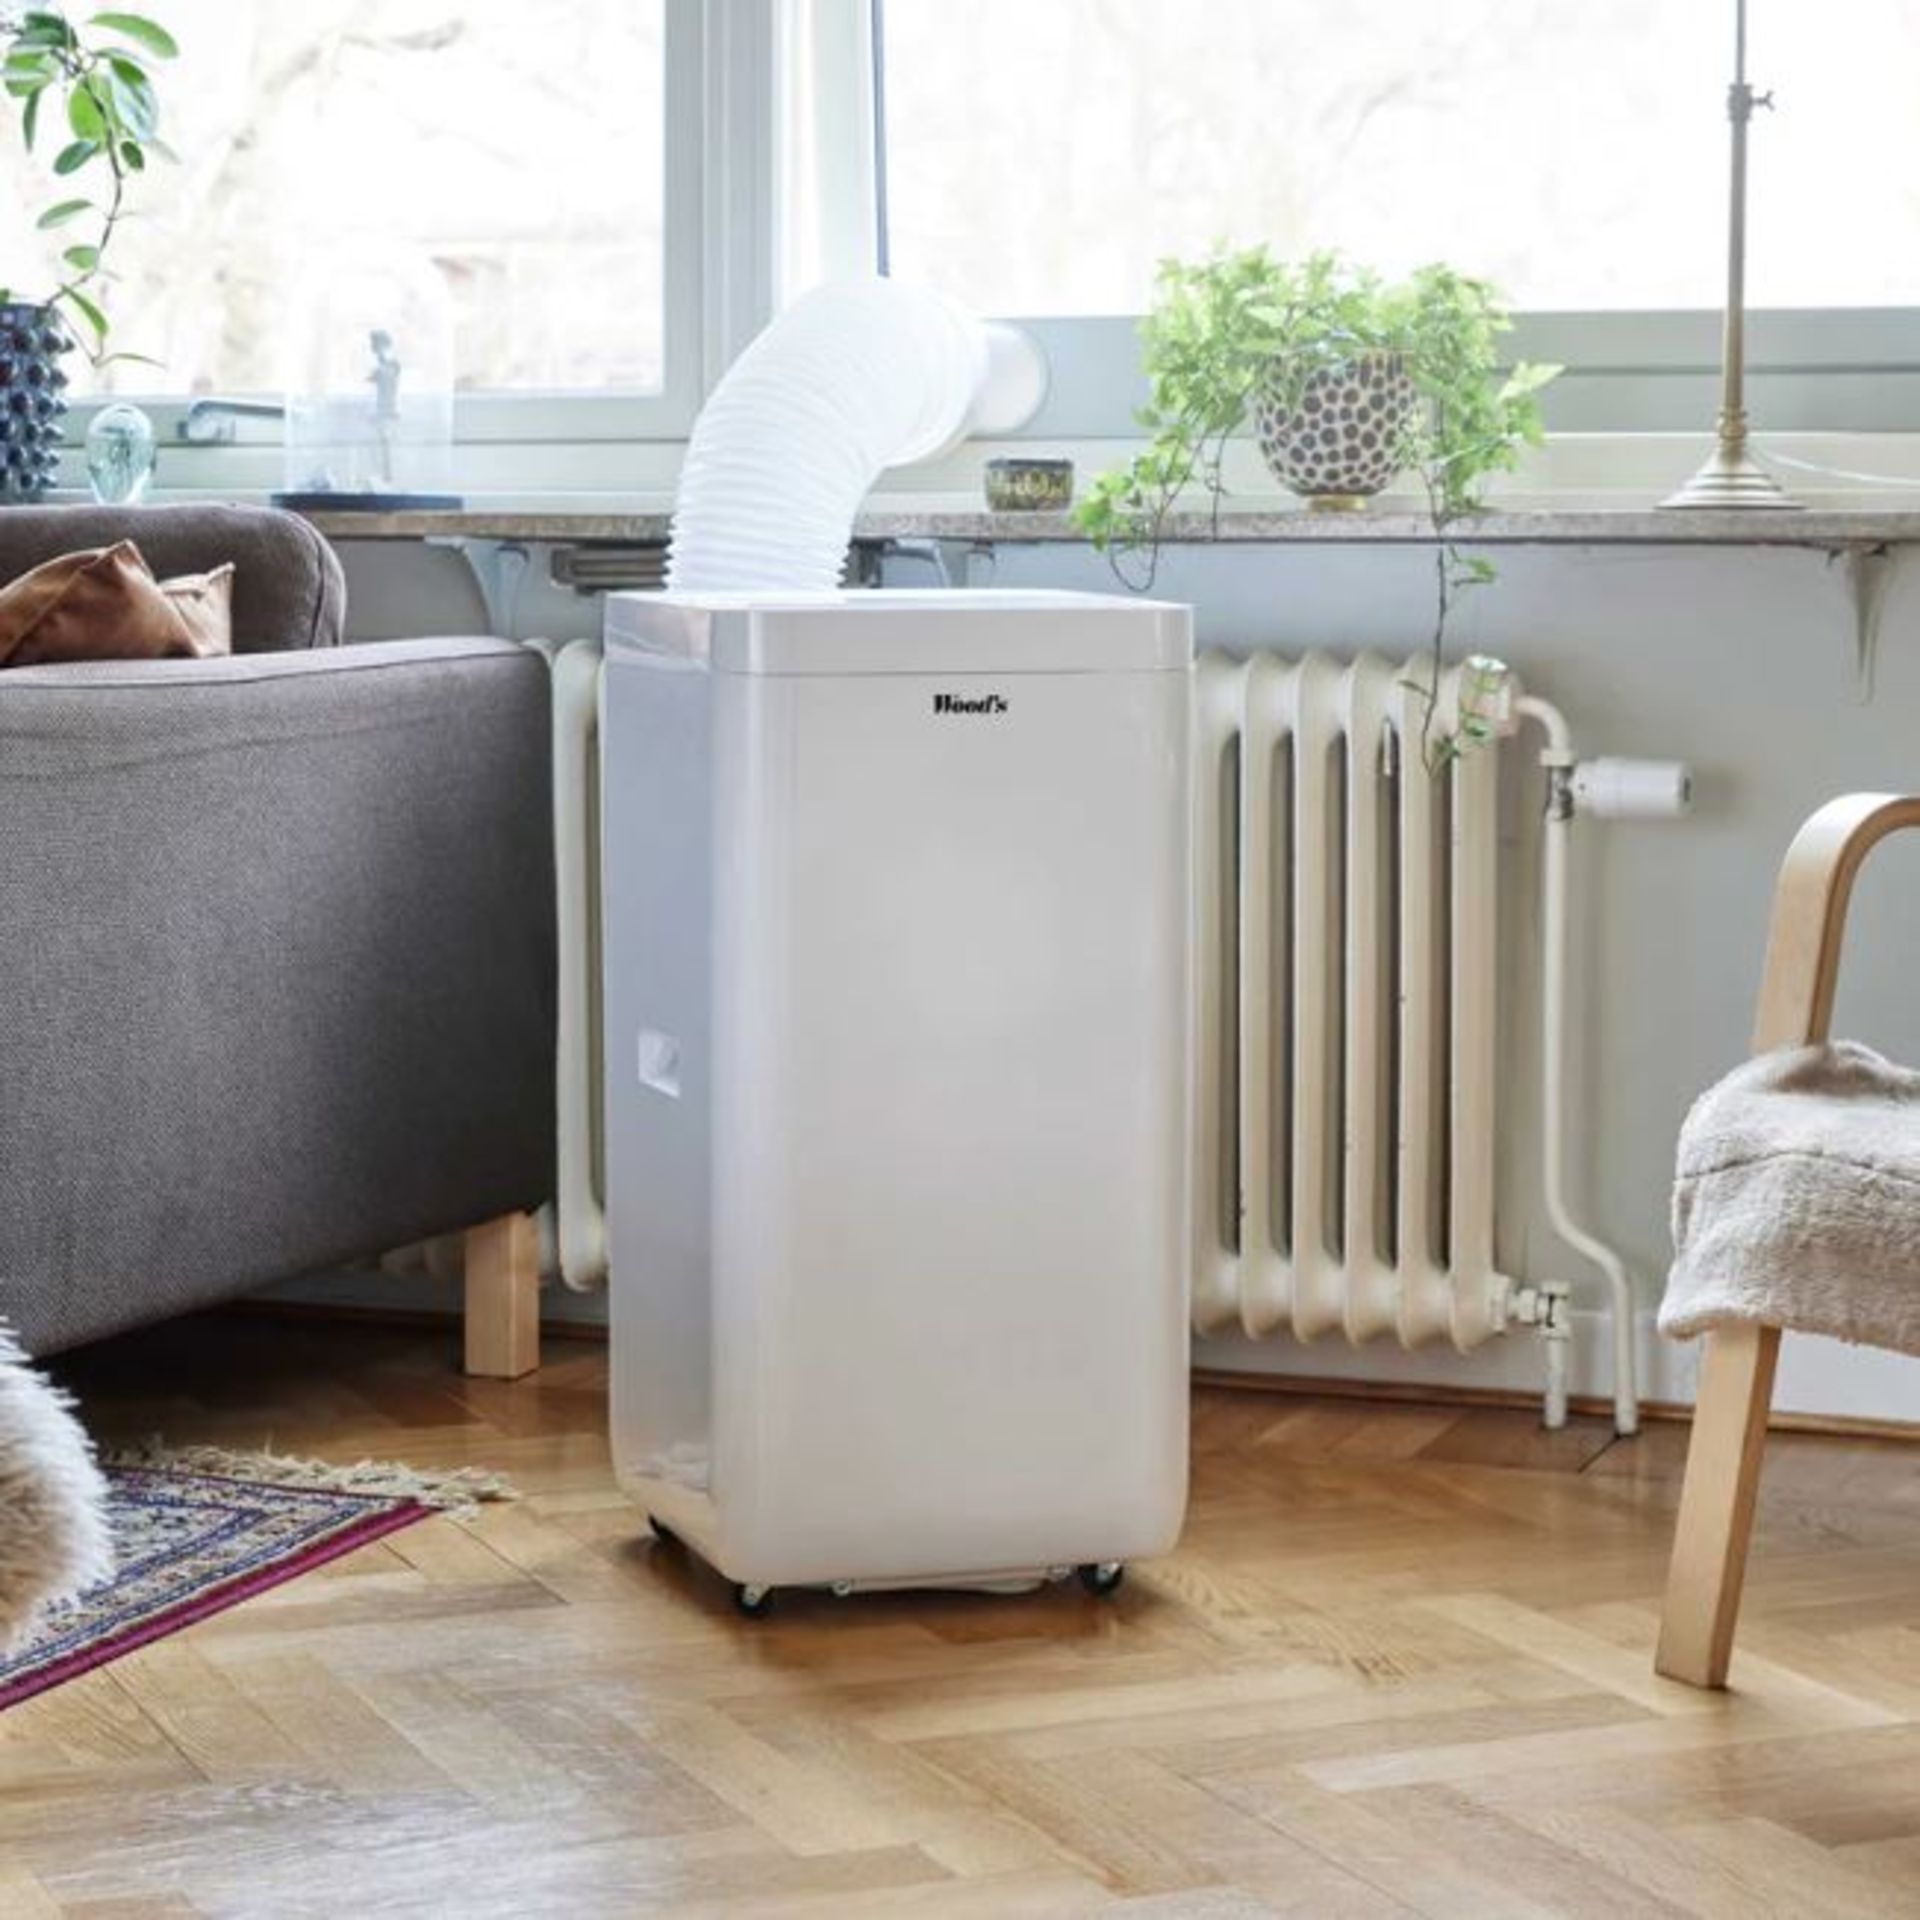 1 BOXED WOOD'S MILAN 9K BTU PORTABLE AIR CONDITIONER RRP Â£399 (PICTURES FOR ILLUSTRATION PURPOSES